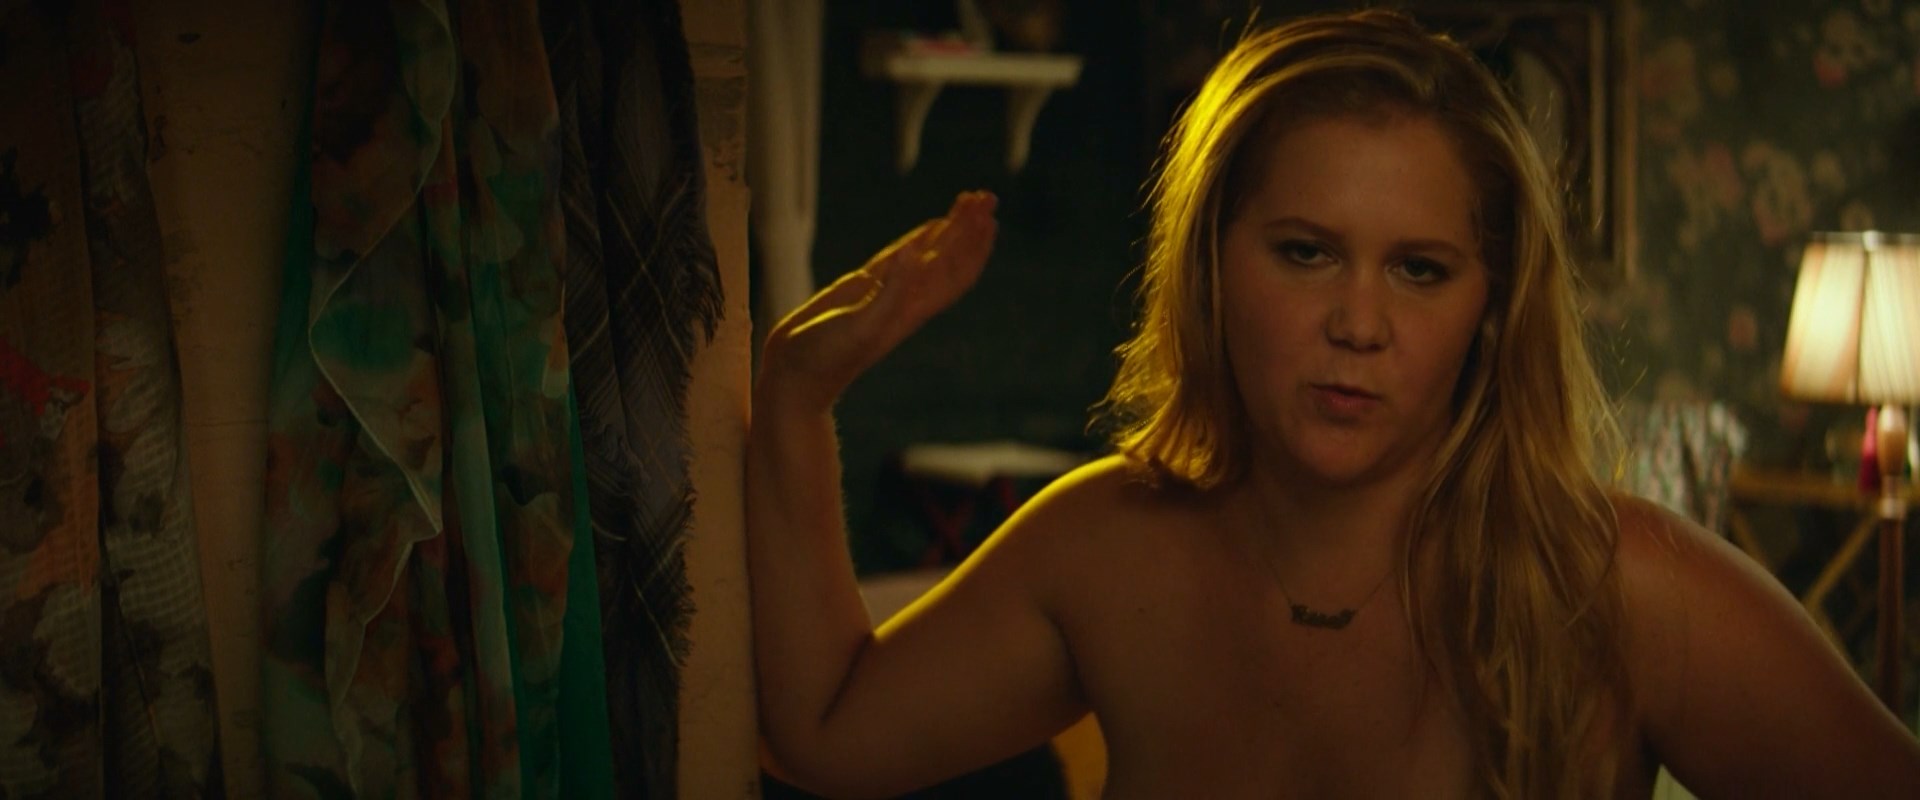 Nudity snatched schumer amy Amy Schumer's